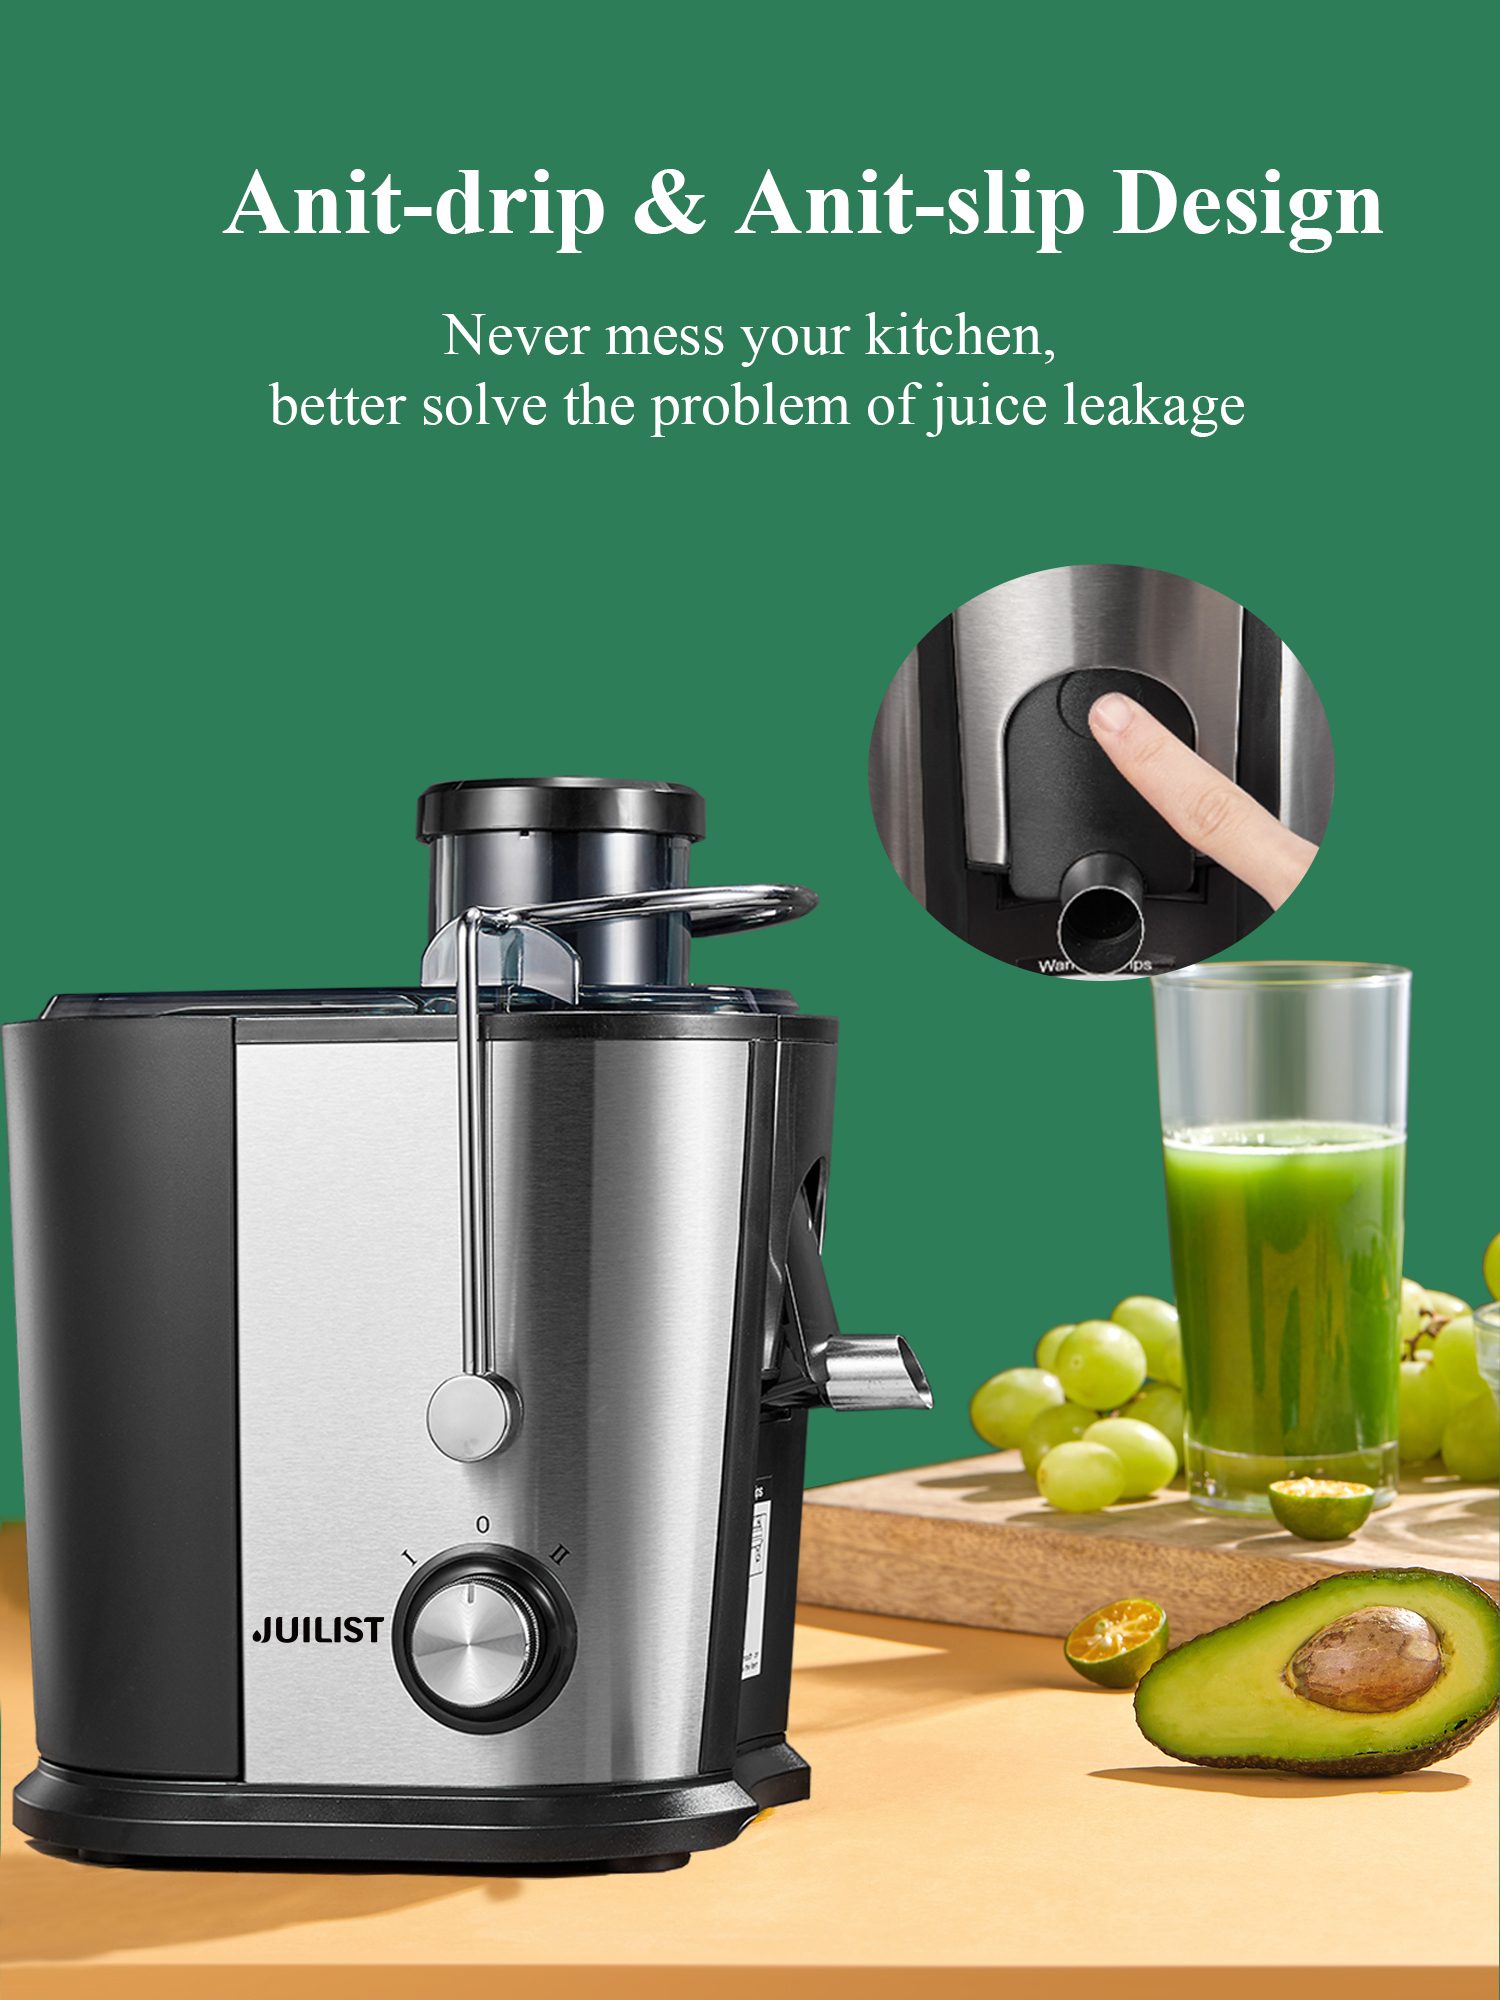 Juilsit Juicer Easy to Clean, 3 " Juice Extractor BPA Free Compact Fruits & Vegetables Juicer, Dual Speed Centrifugal Juicer with Non-Drip Function, Stainless Steel Juicers - image 4 of 8